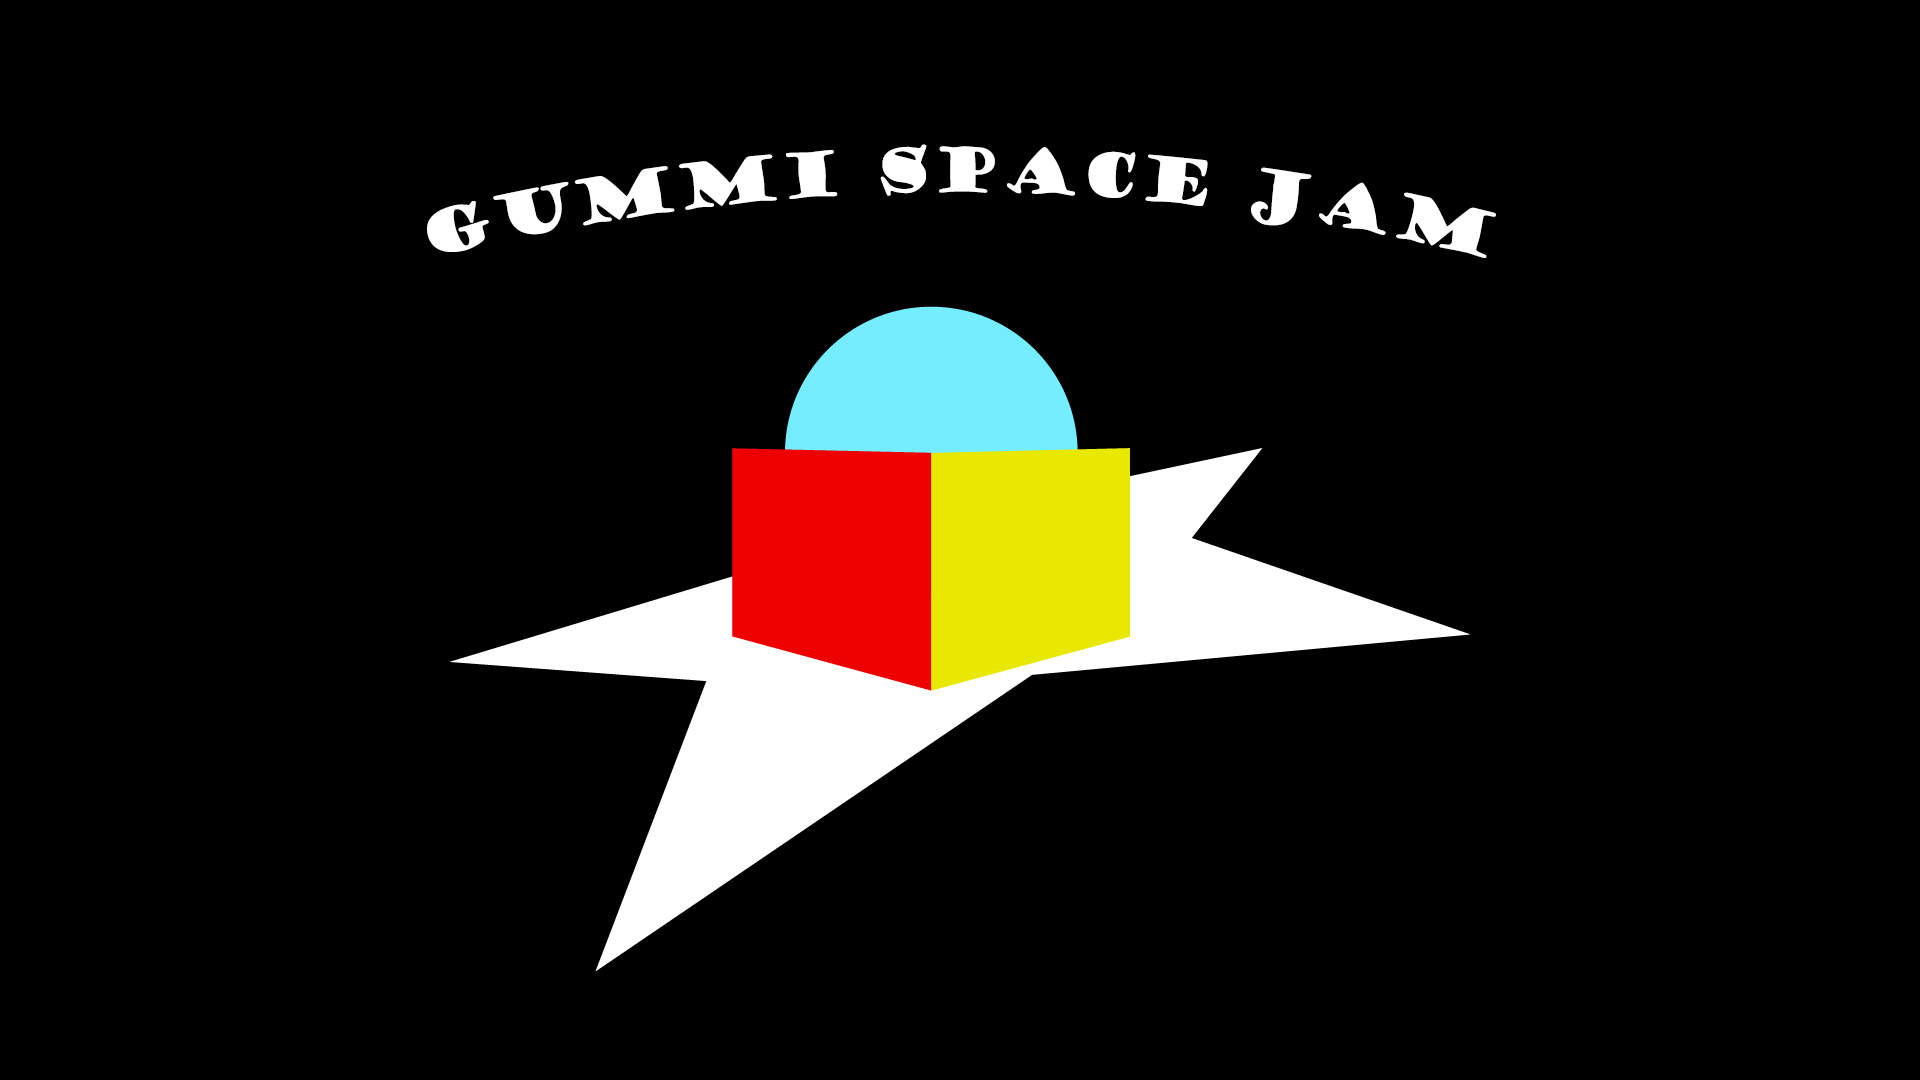 Made in association with the 'Gummi Space Jam' team